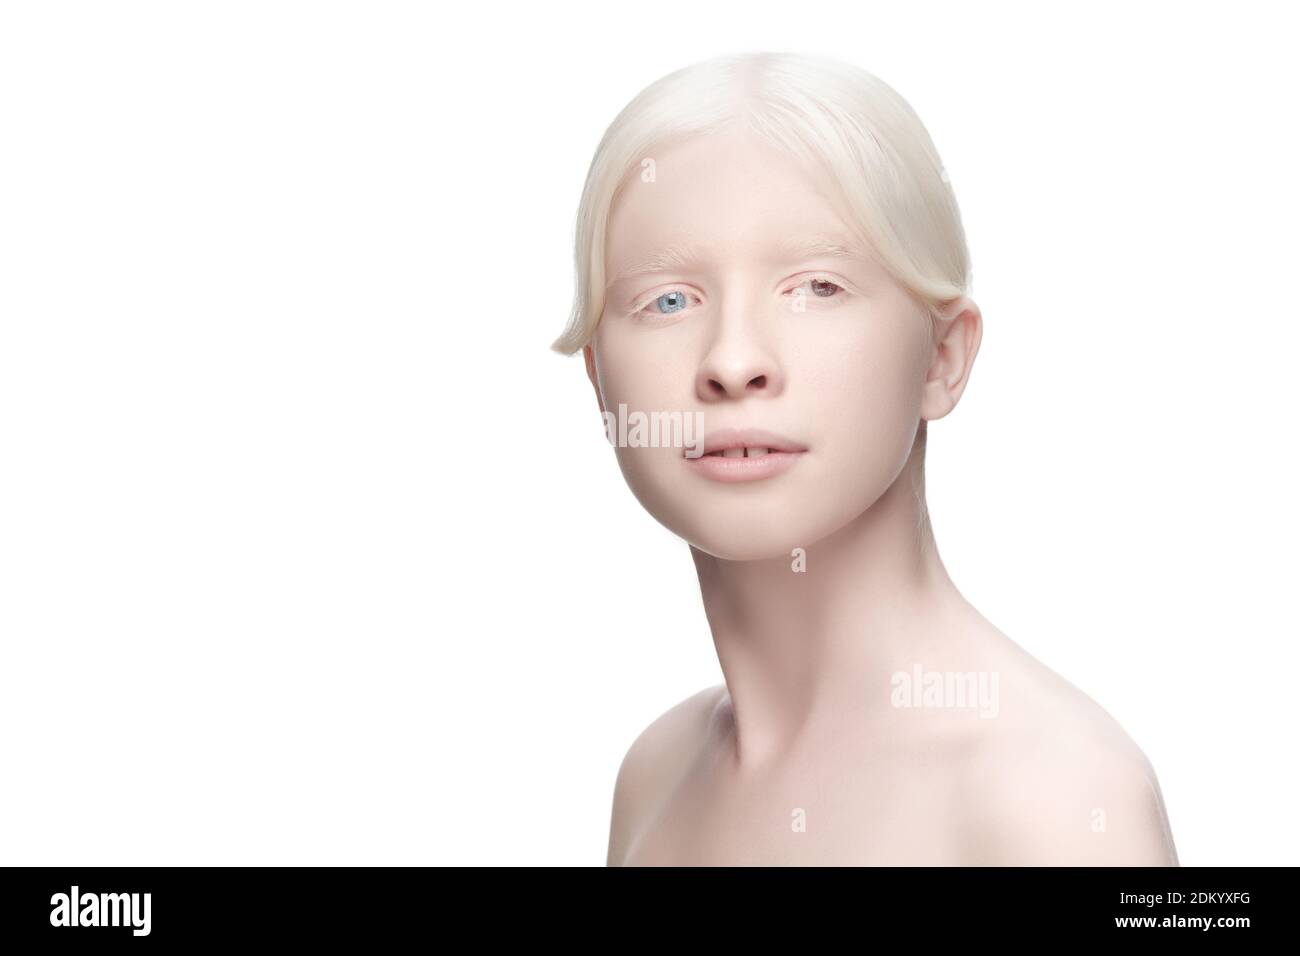 Beautiful albino woman with heterochromia isolated on white studio background. Copyspace for ad. Concept of beauty, fashion, healthcare, skincare. Complete special eyes colour, blue and brown. Stock Photo